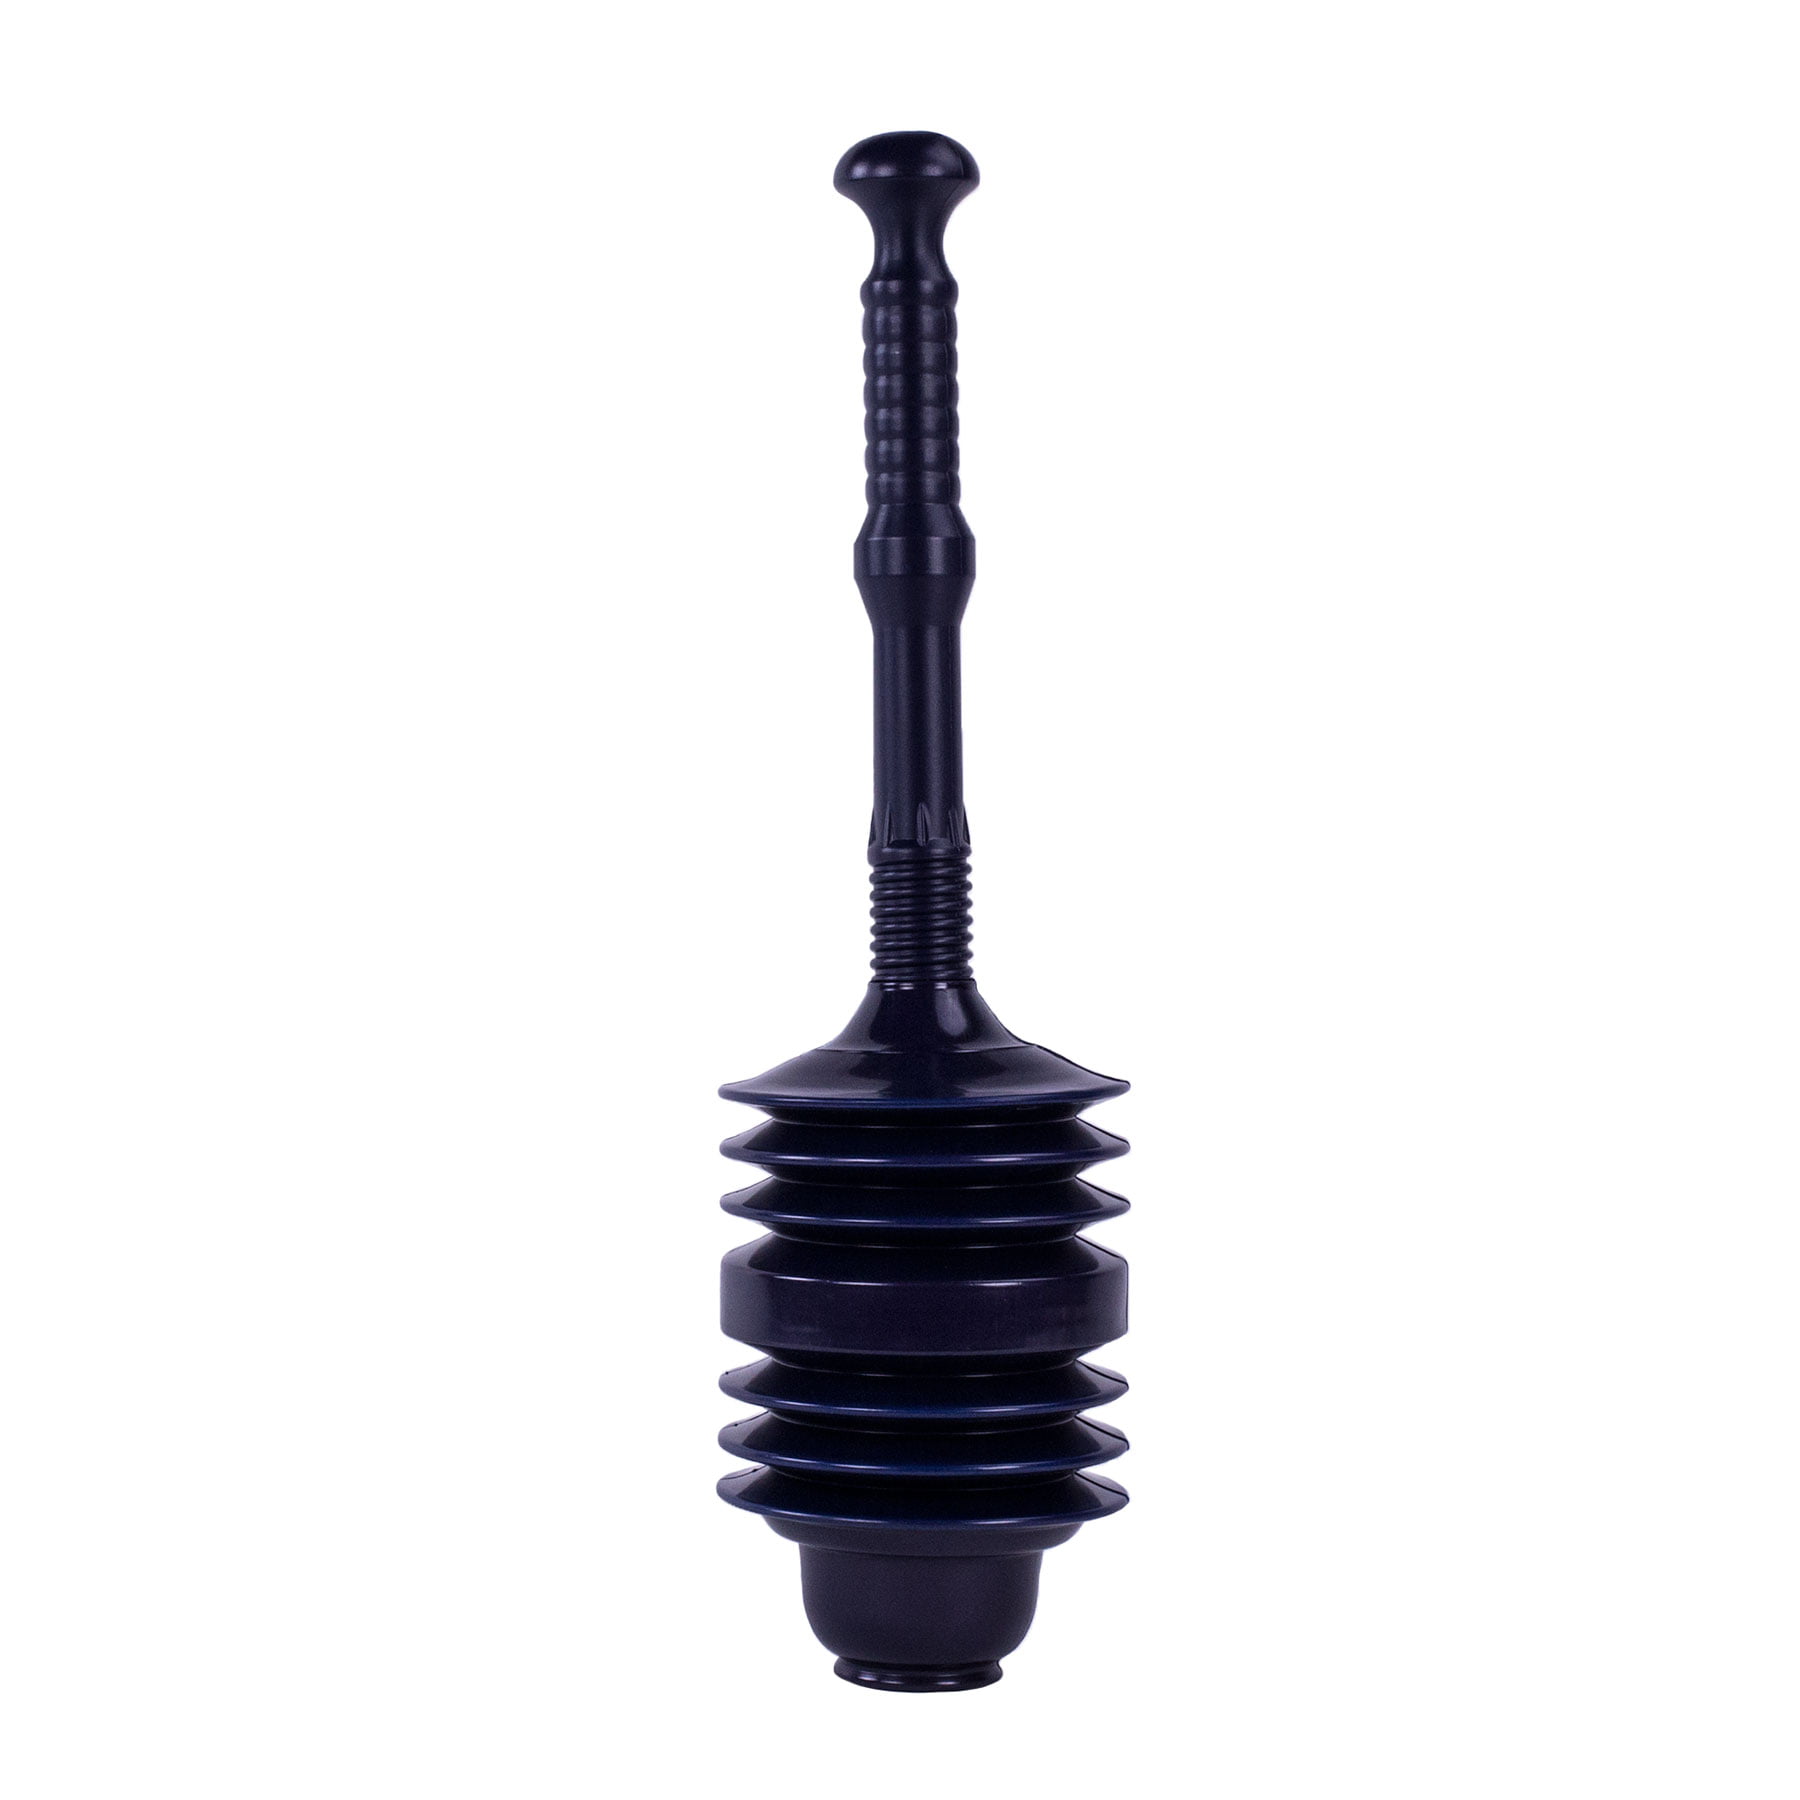 Arley 3 Force Cup Plunger Small Arley Plungers